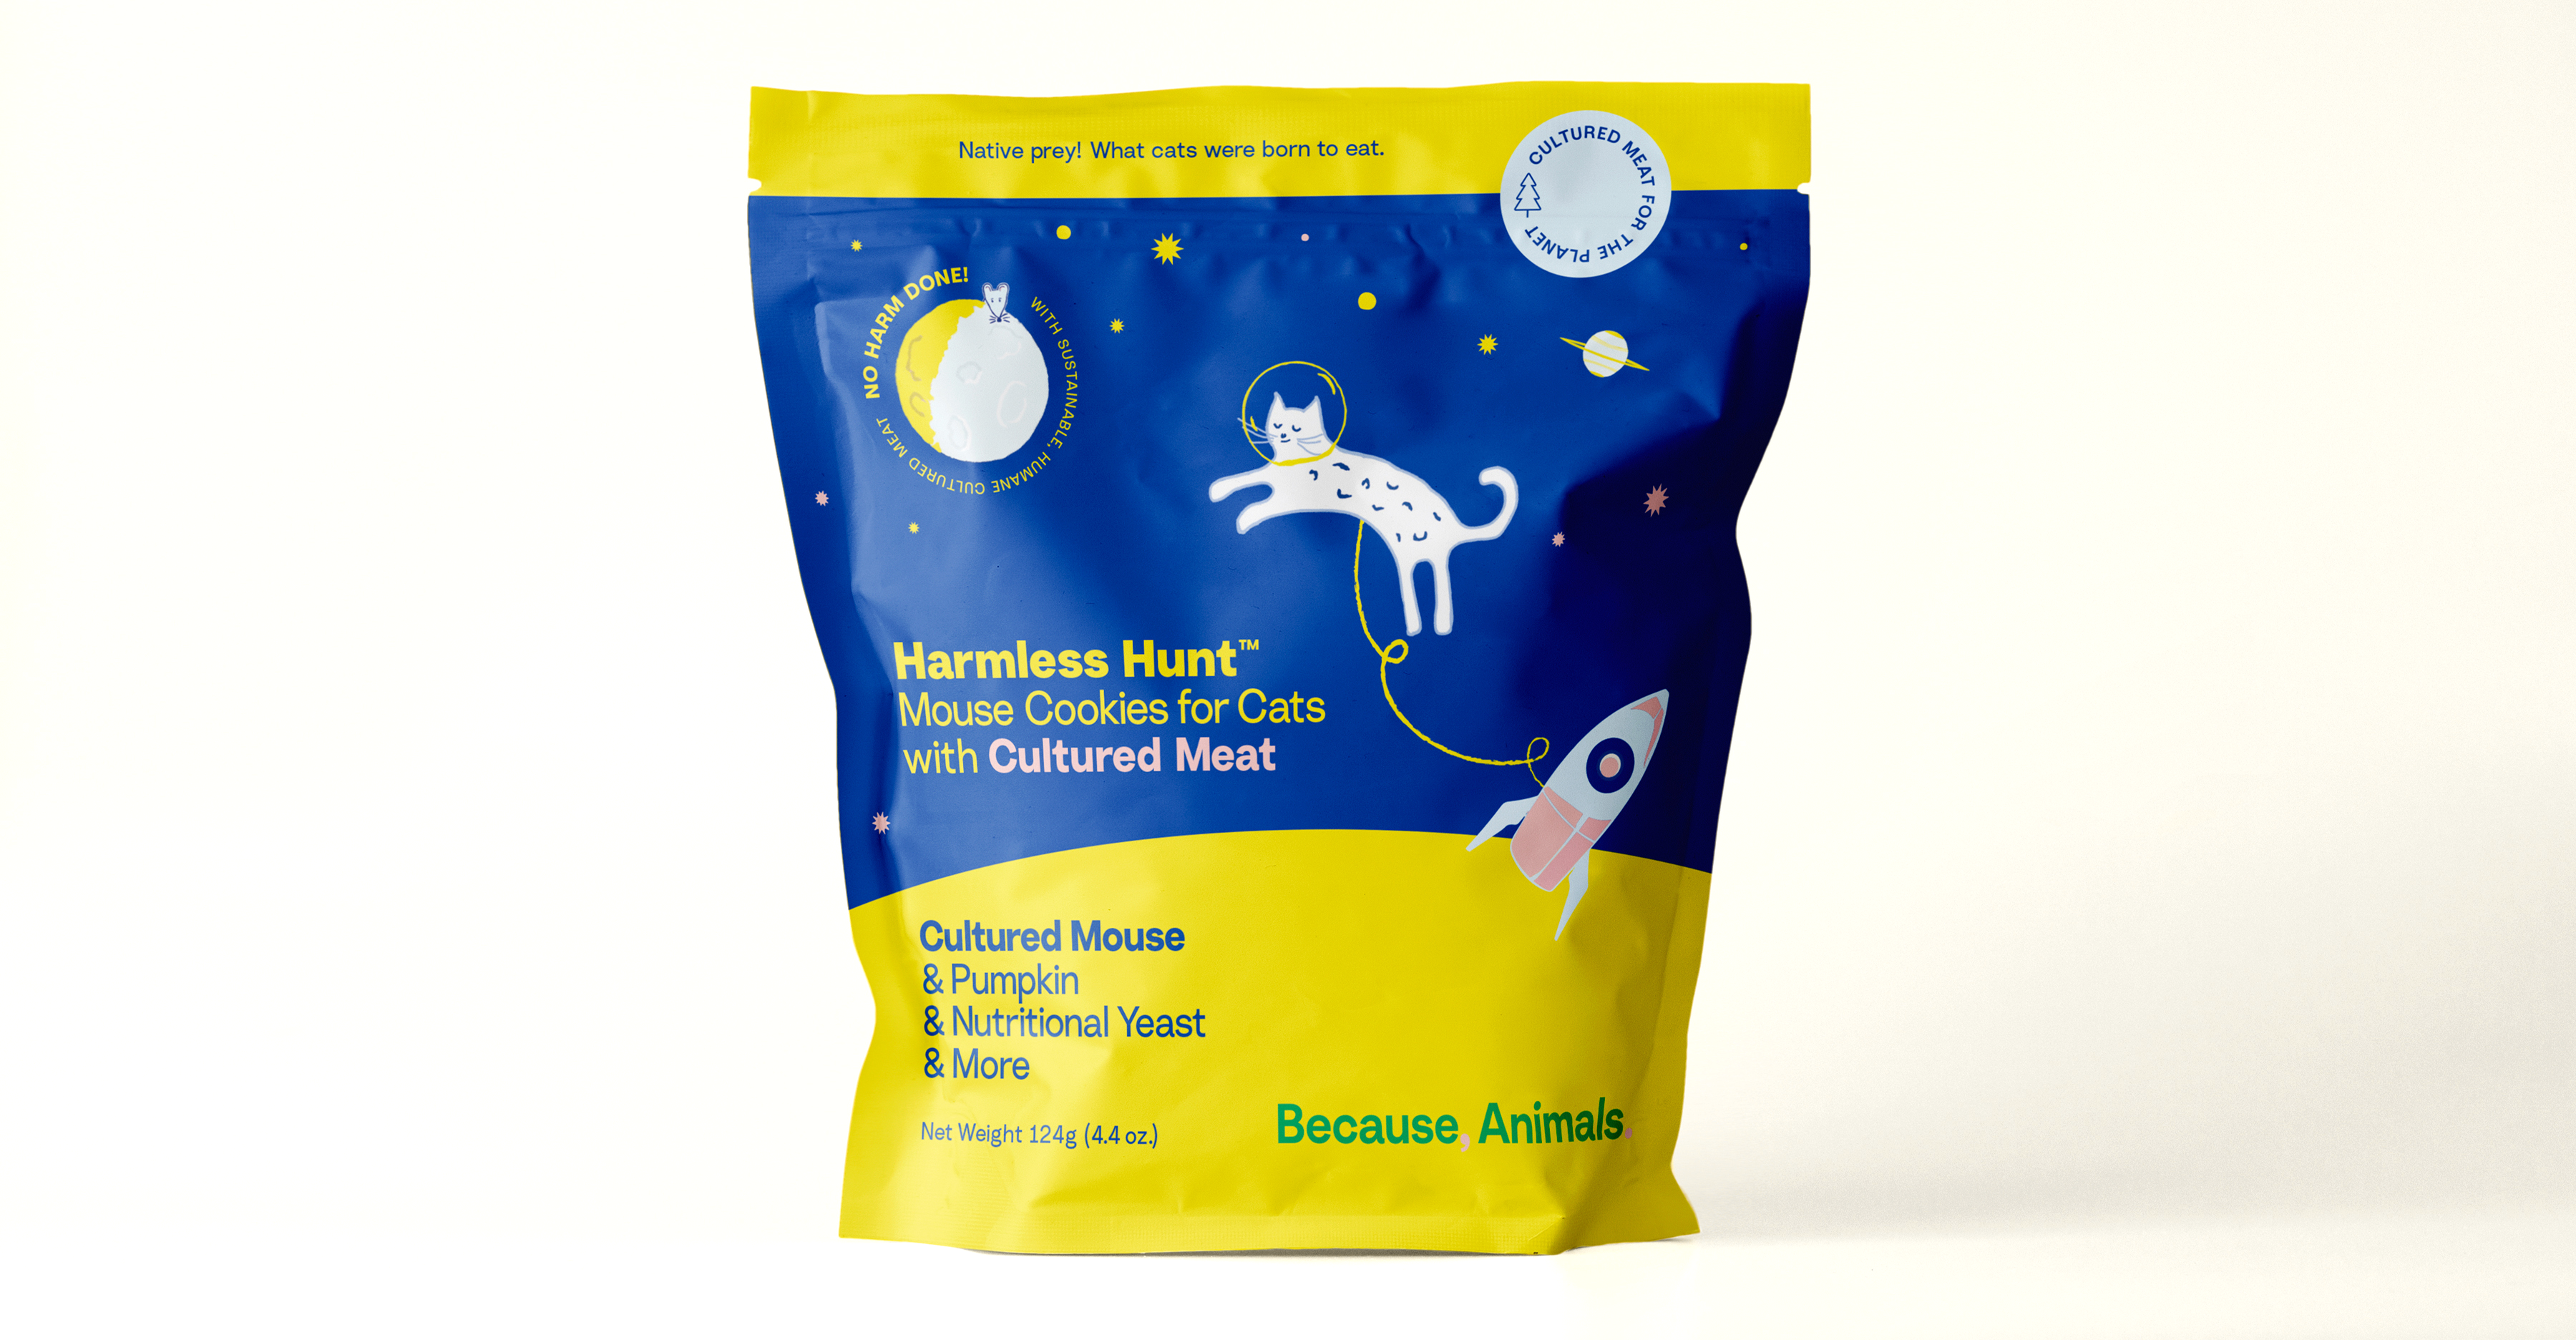 A bag of Harmless Hunt Mouse Cookies for Cats